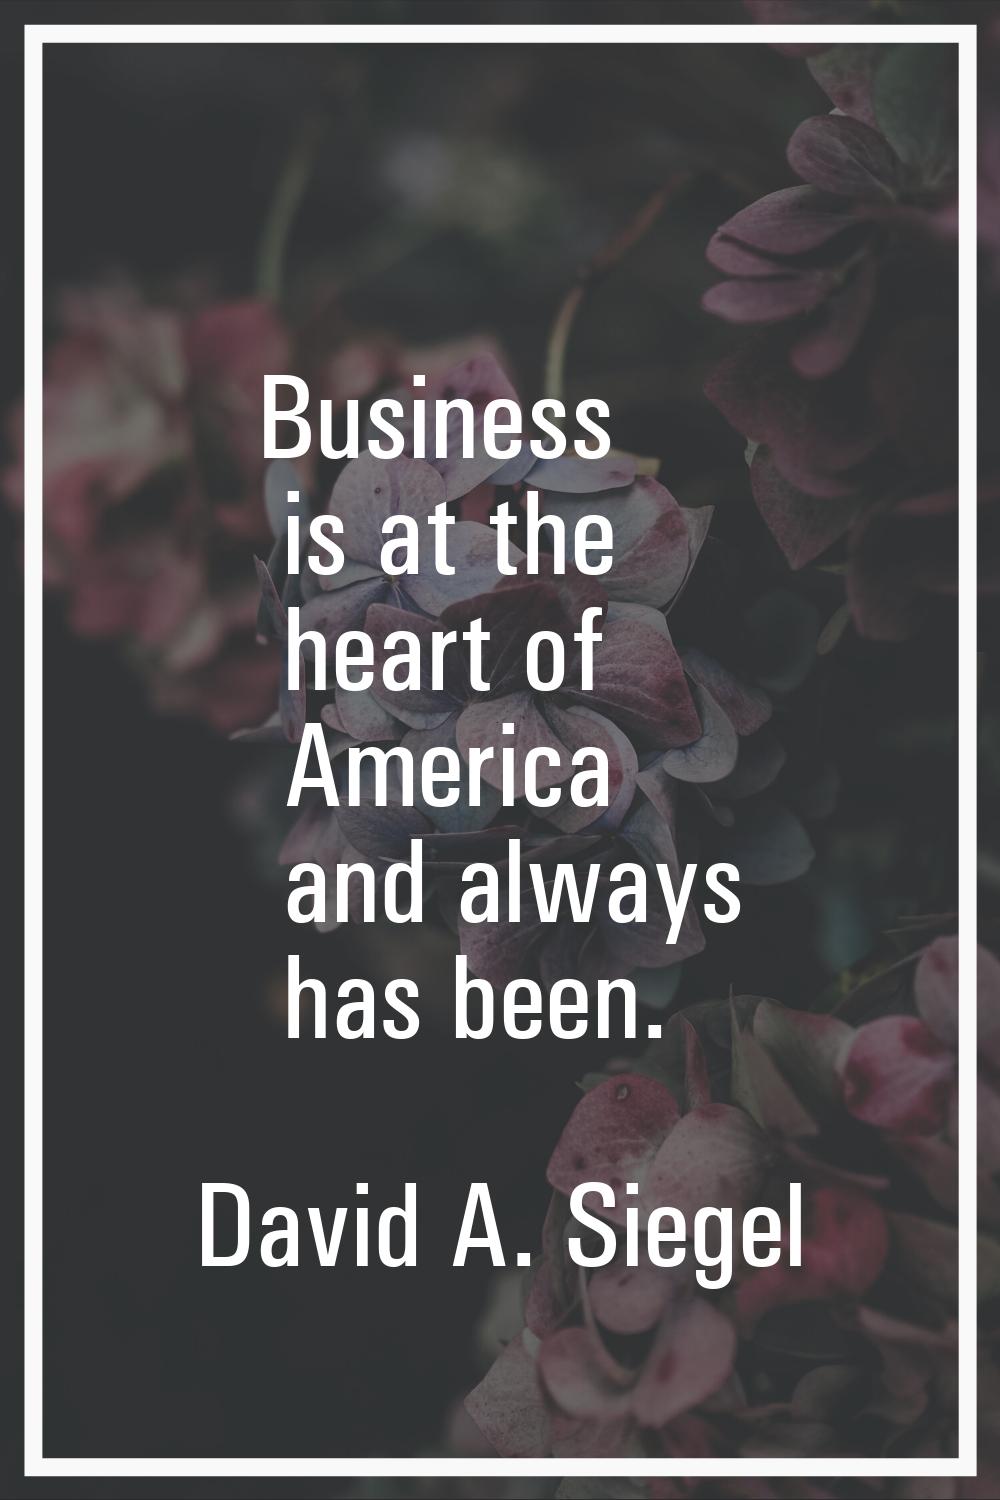 Business is at the heart of America and always has been.